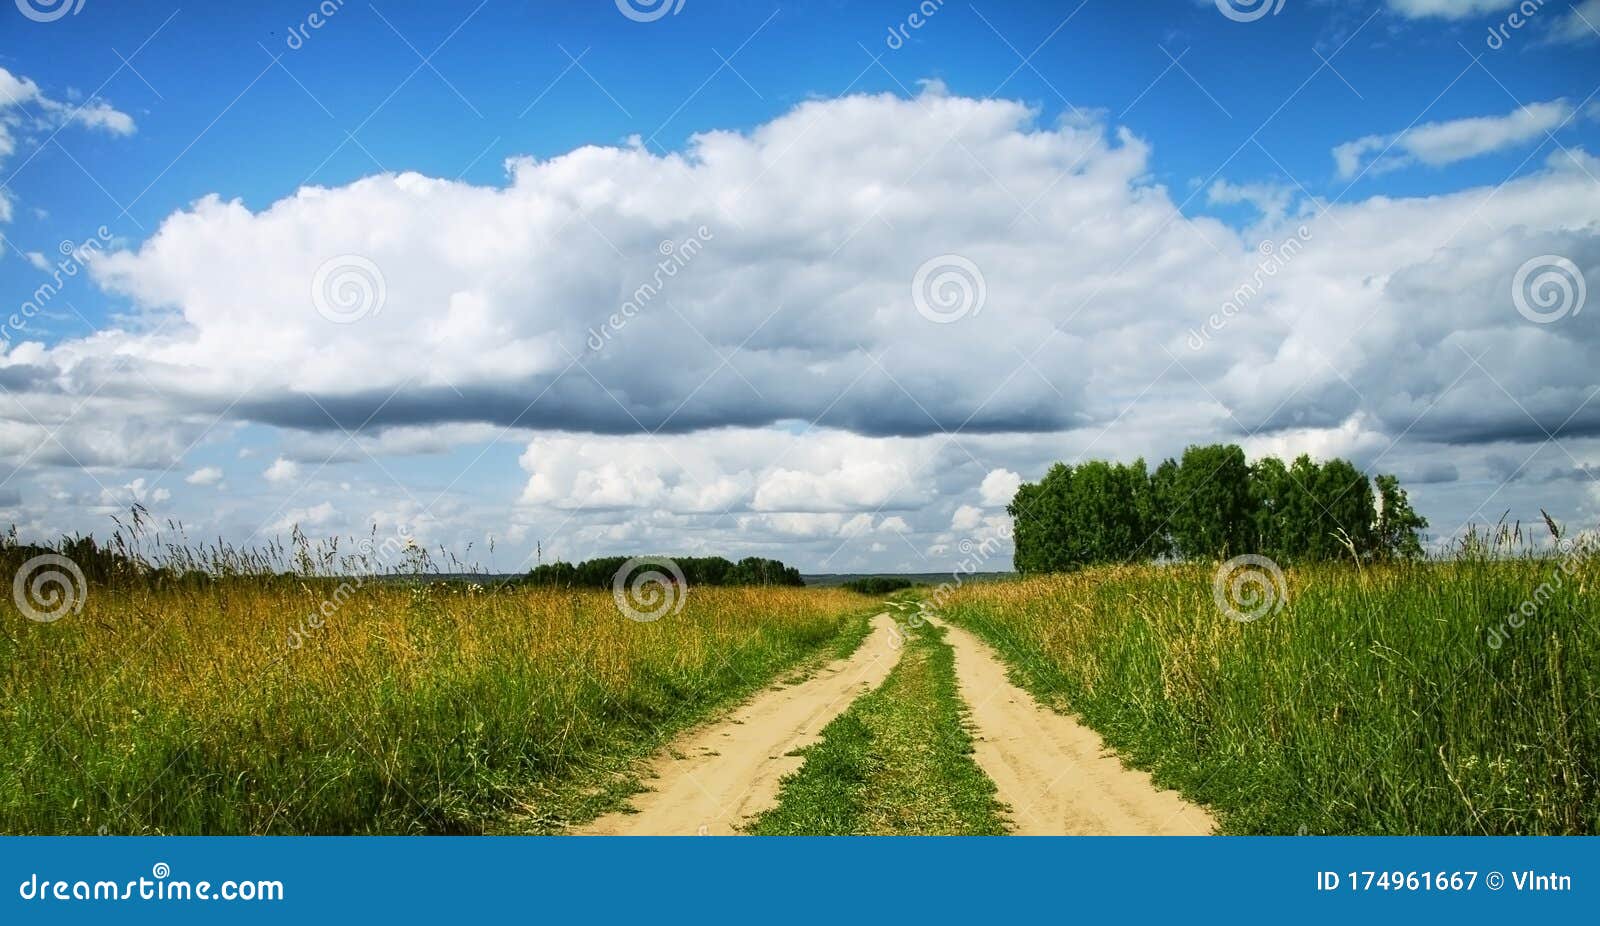 Country Road Summer Background Stock Image Image Of Fresh Weather